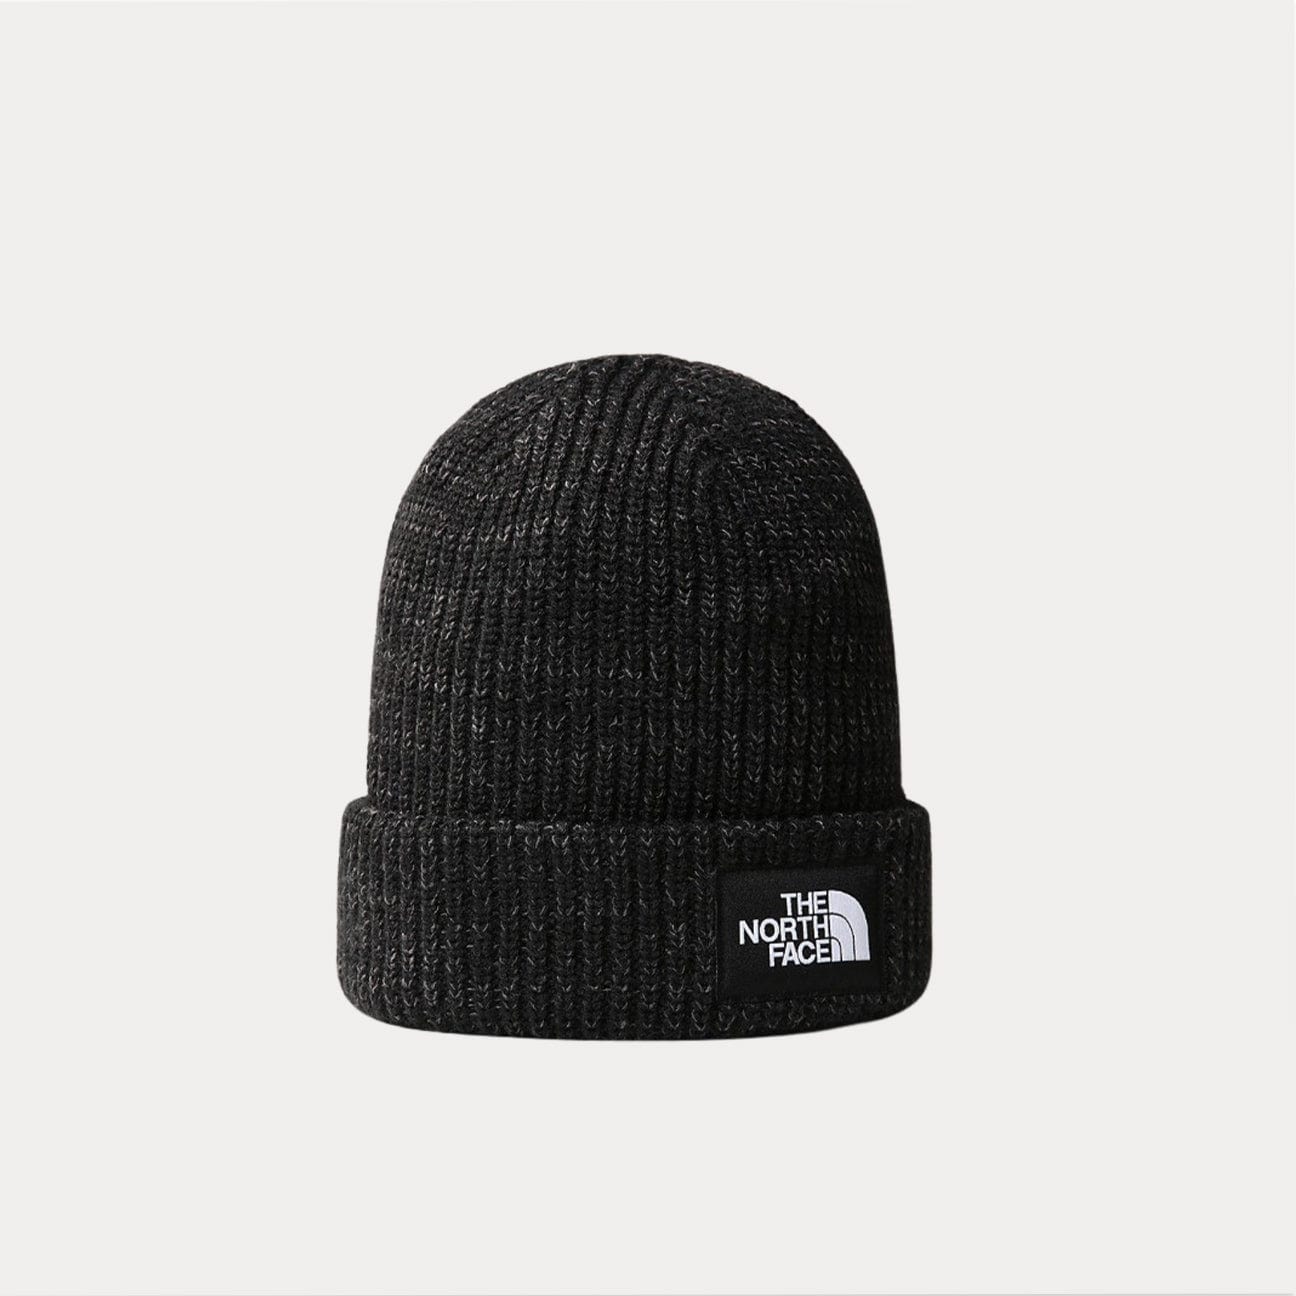 THE NORTH FACE Cappello Beanie Salty Dog Black